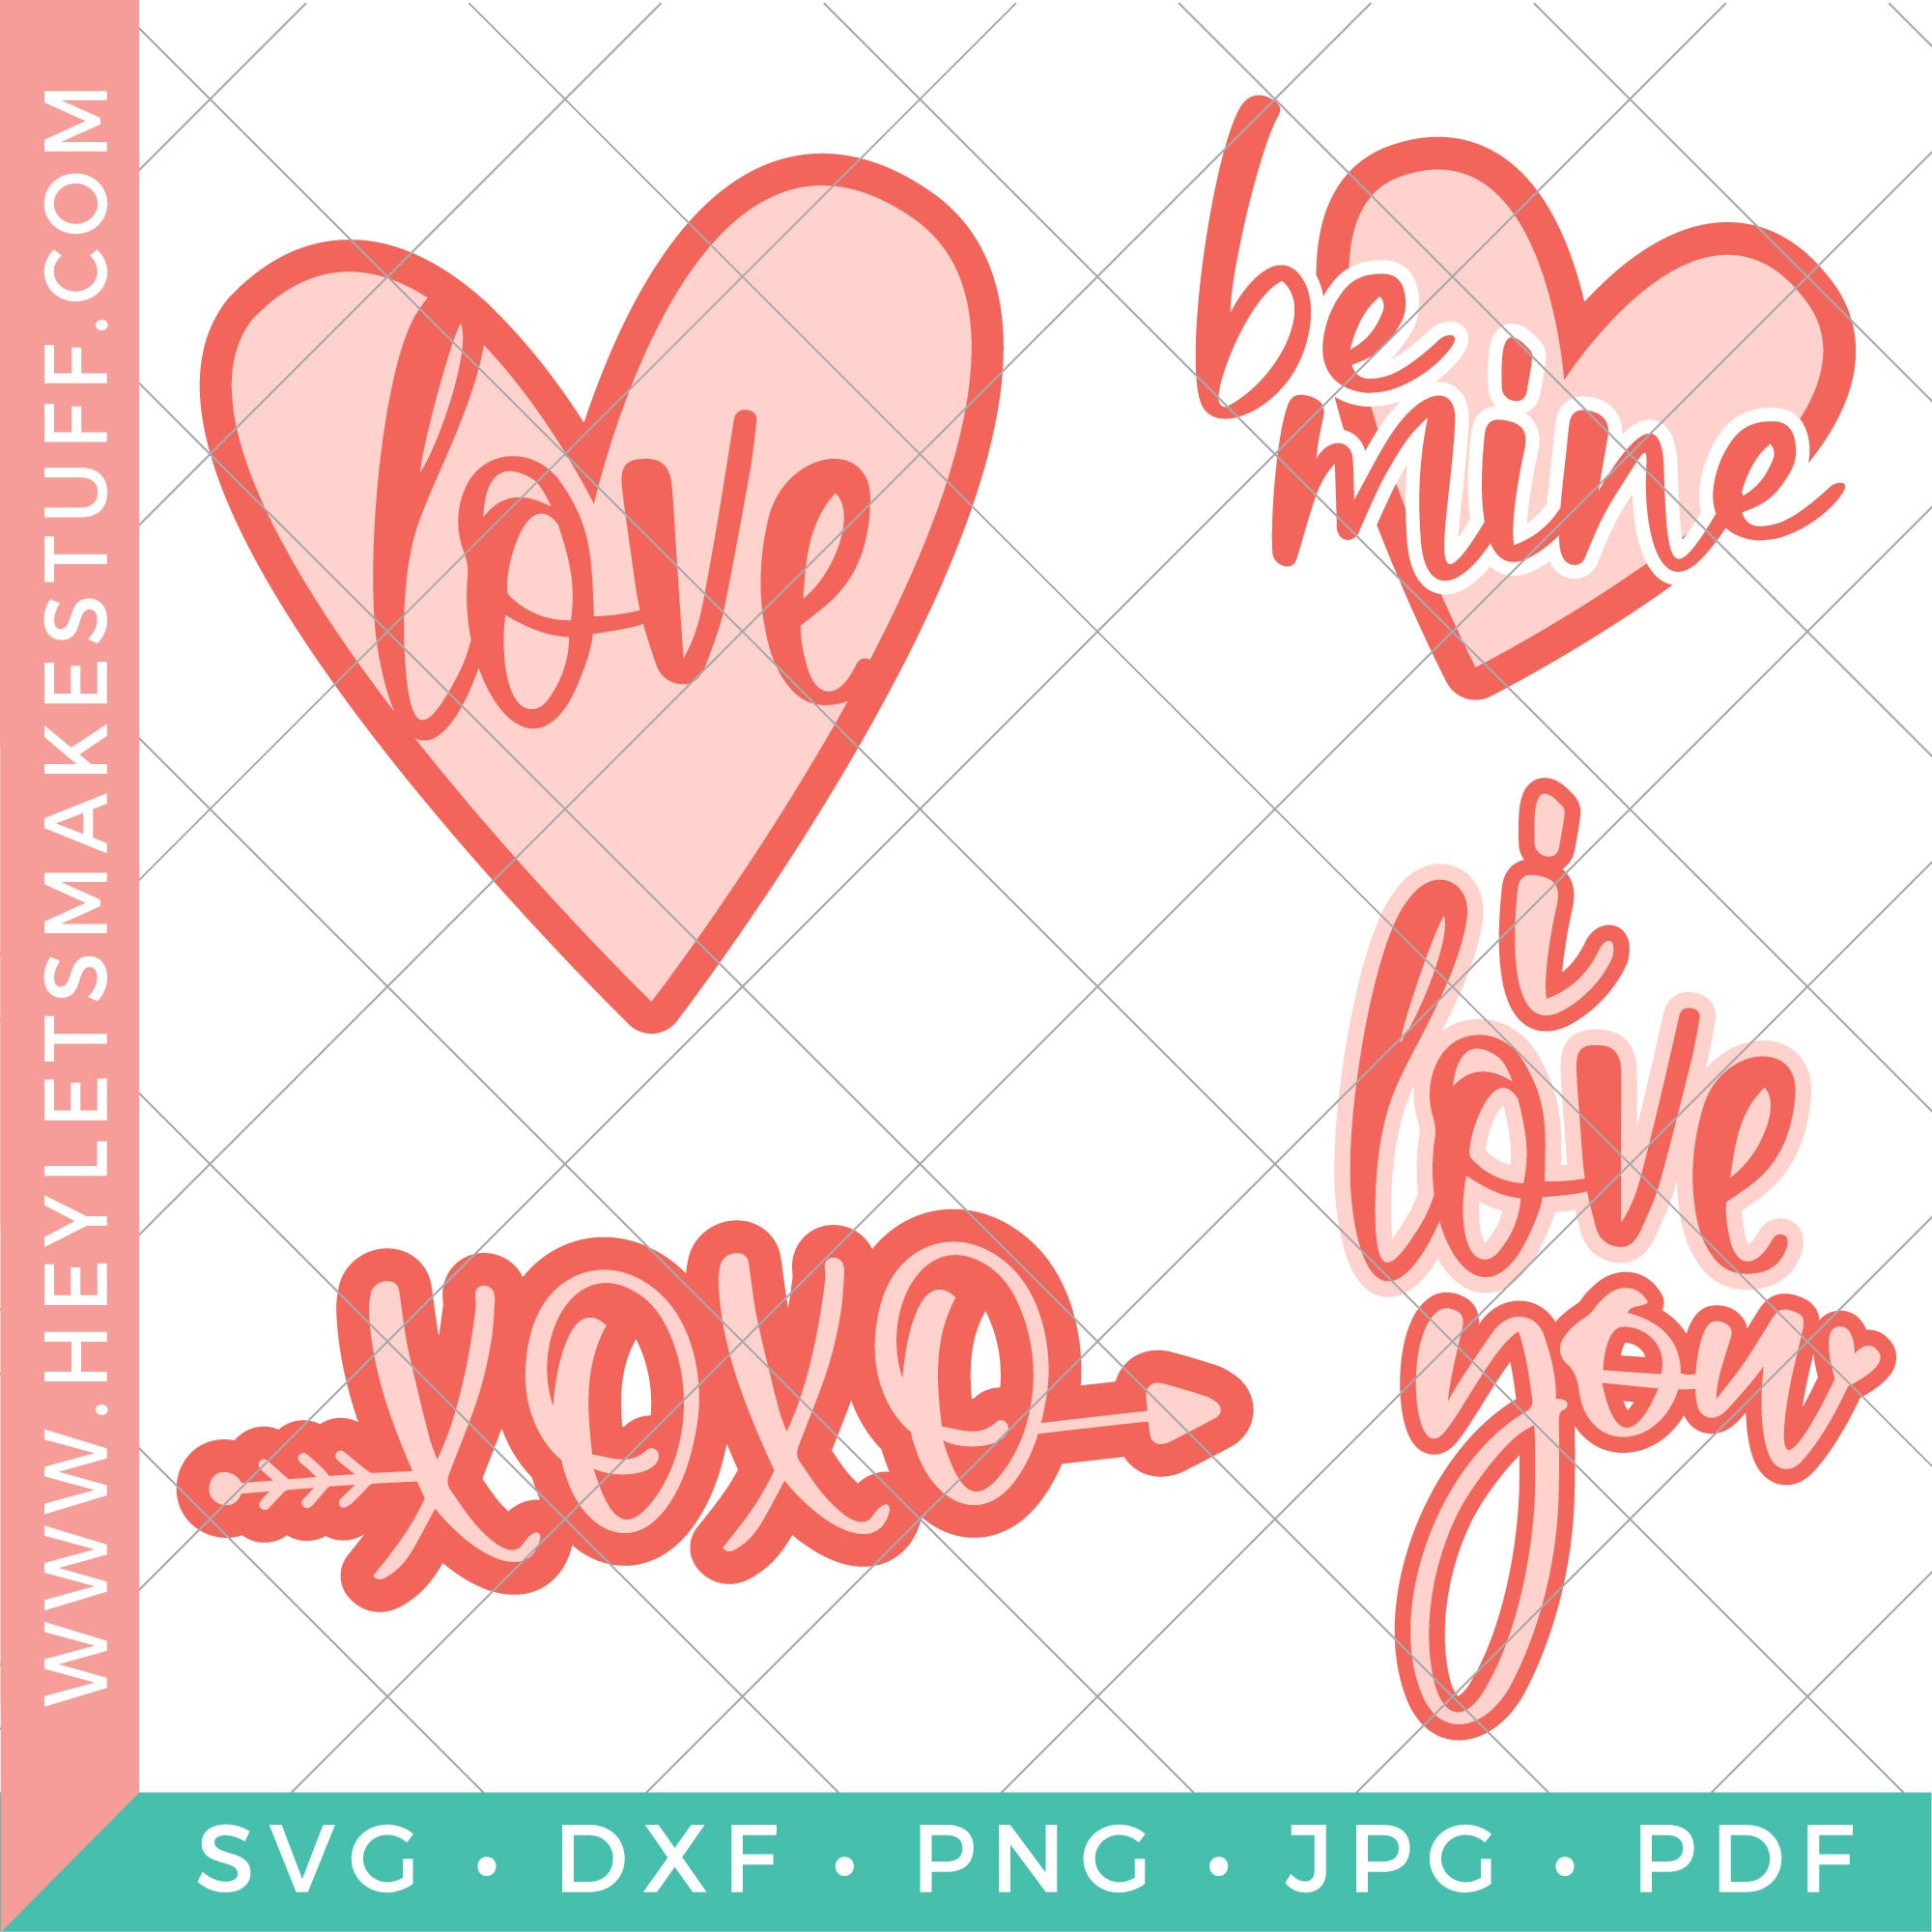 Download Love Svg Files To Make Gifts For Everyone Hey Lets Make Stuff